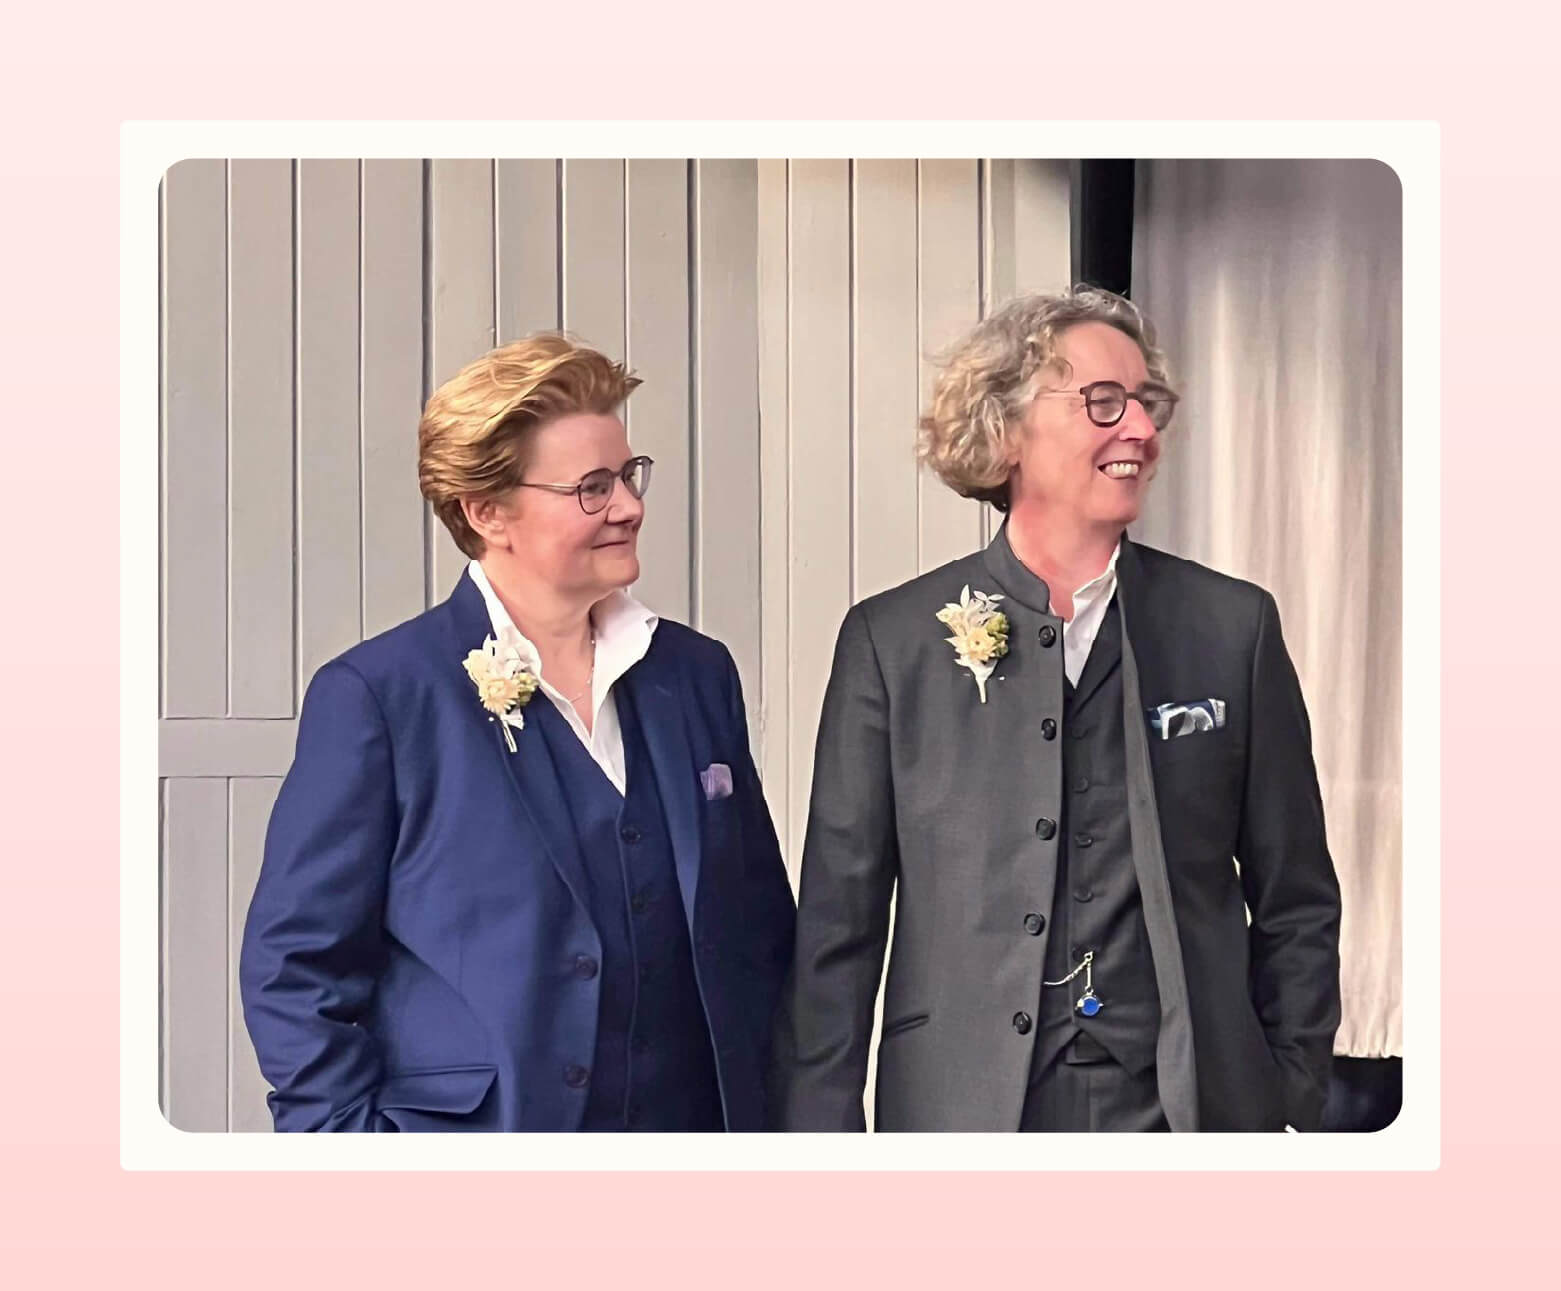 A couple holding hands, one wearing a blue suit and the other wearing a grey suit, both from The Butch Clothing Company, look to their left with smiles on their faces